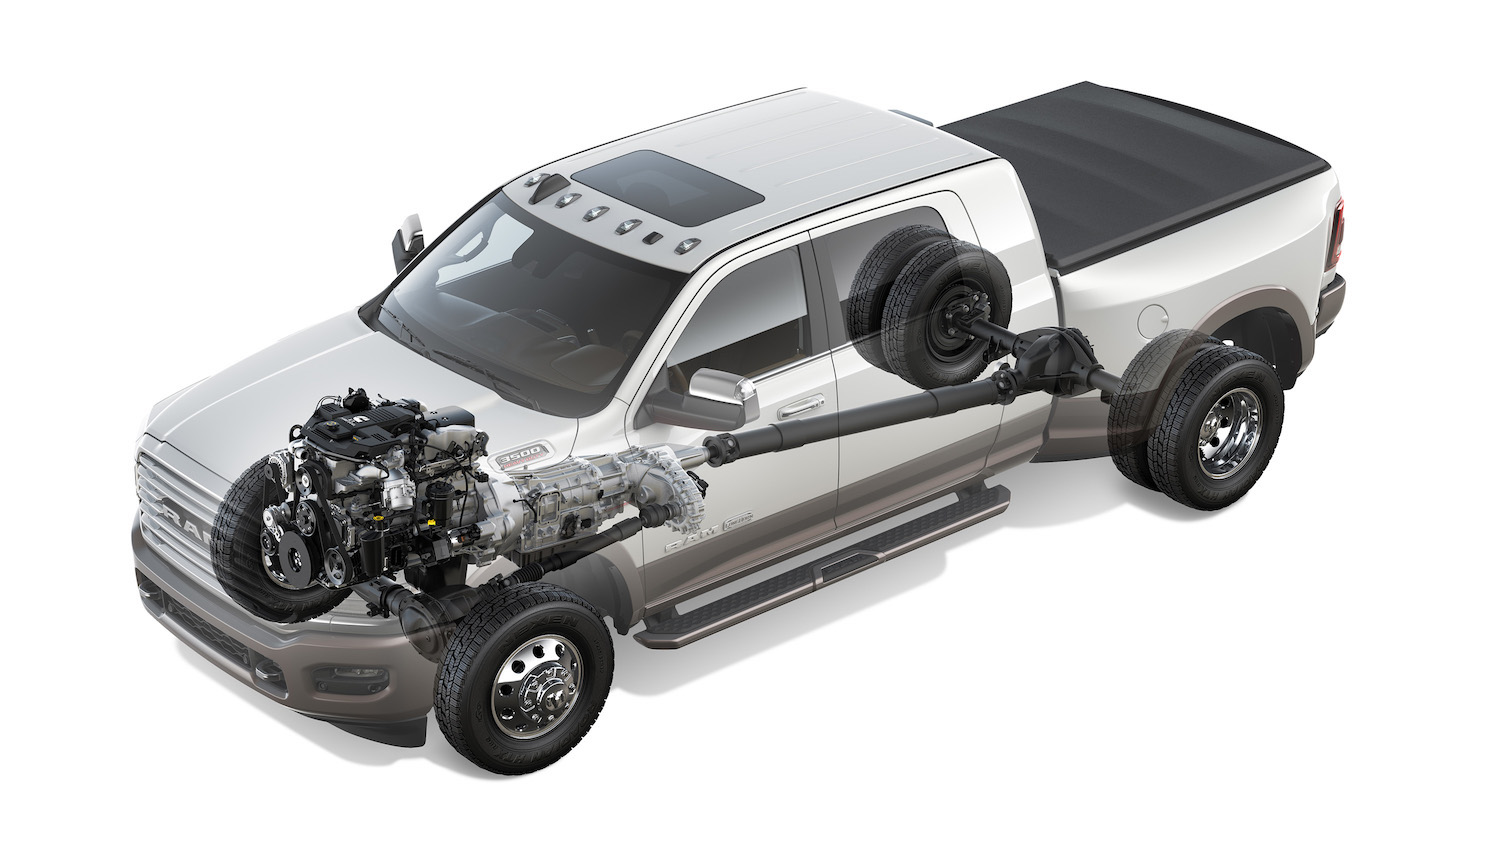 Render of a 2022 Ram 3500 truck with its Dodge powertrain visible.